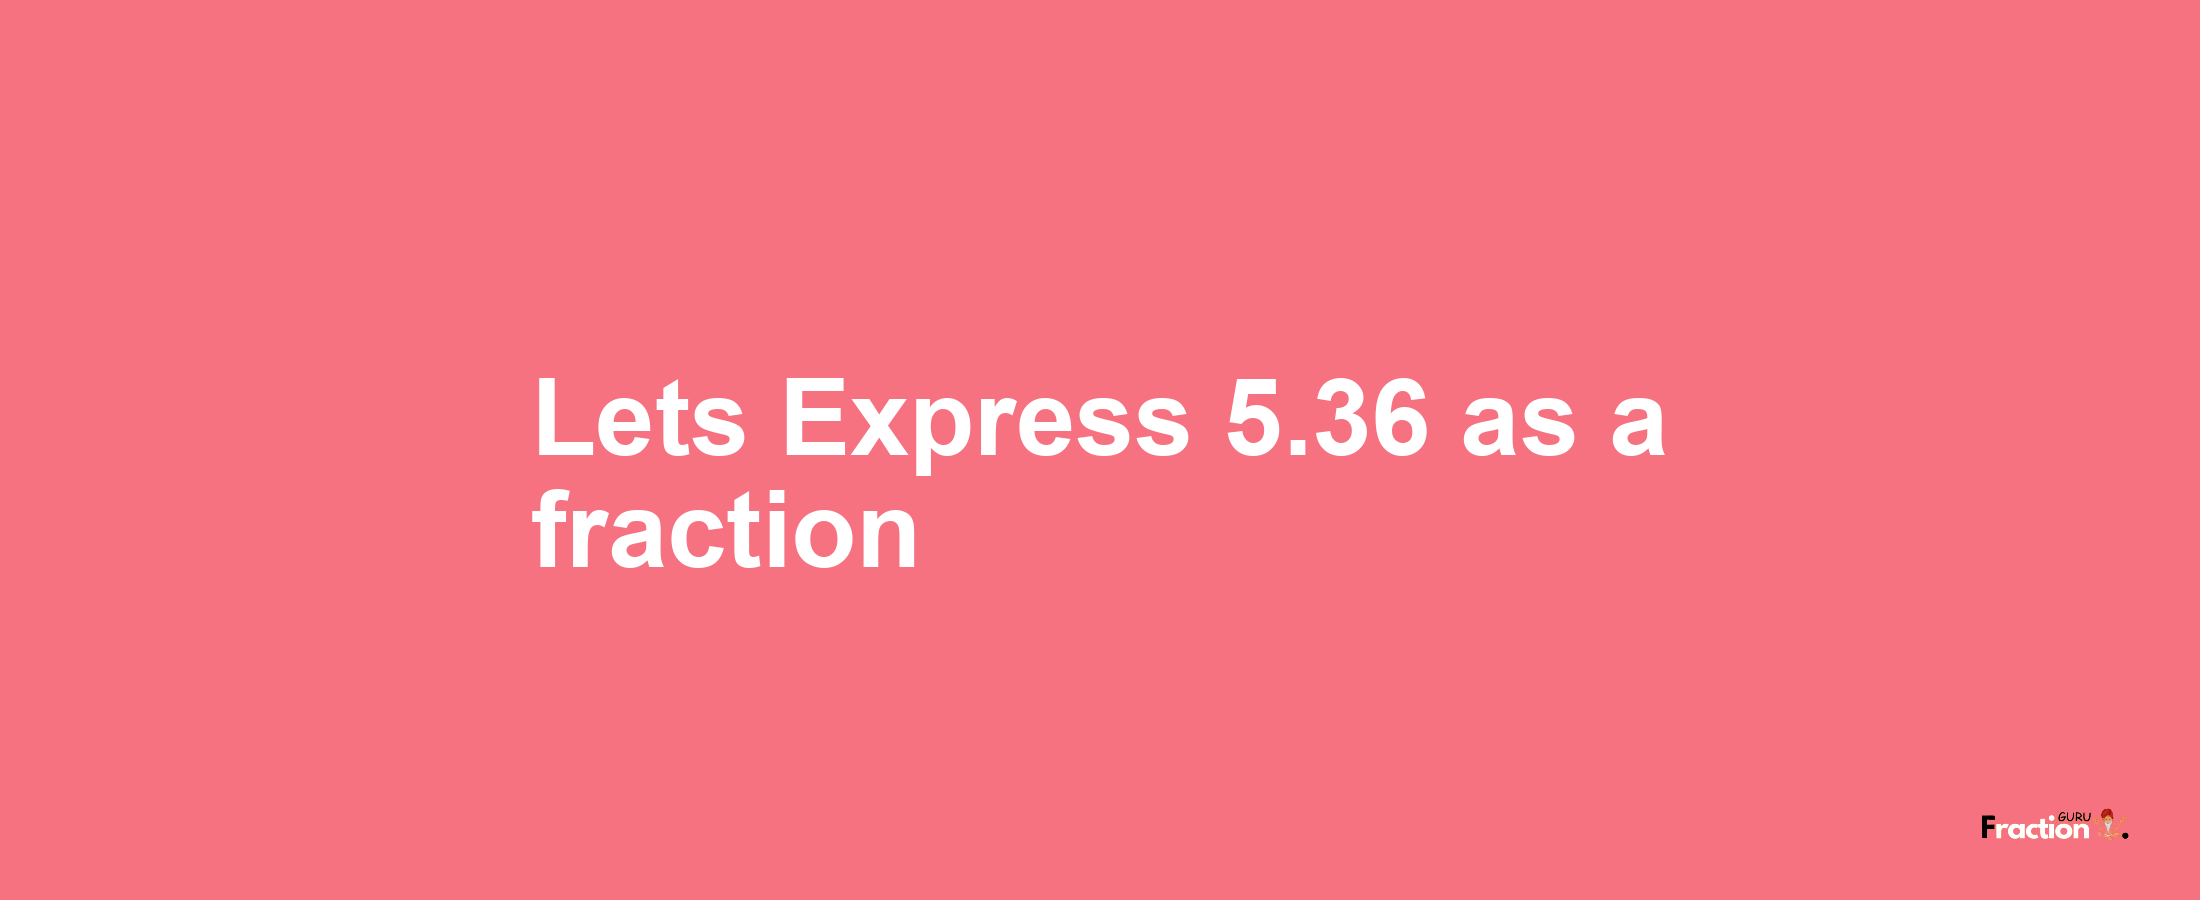 Lets Express 5.36 as afraction